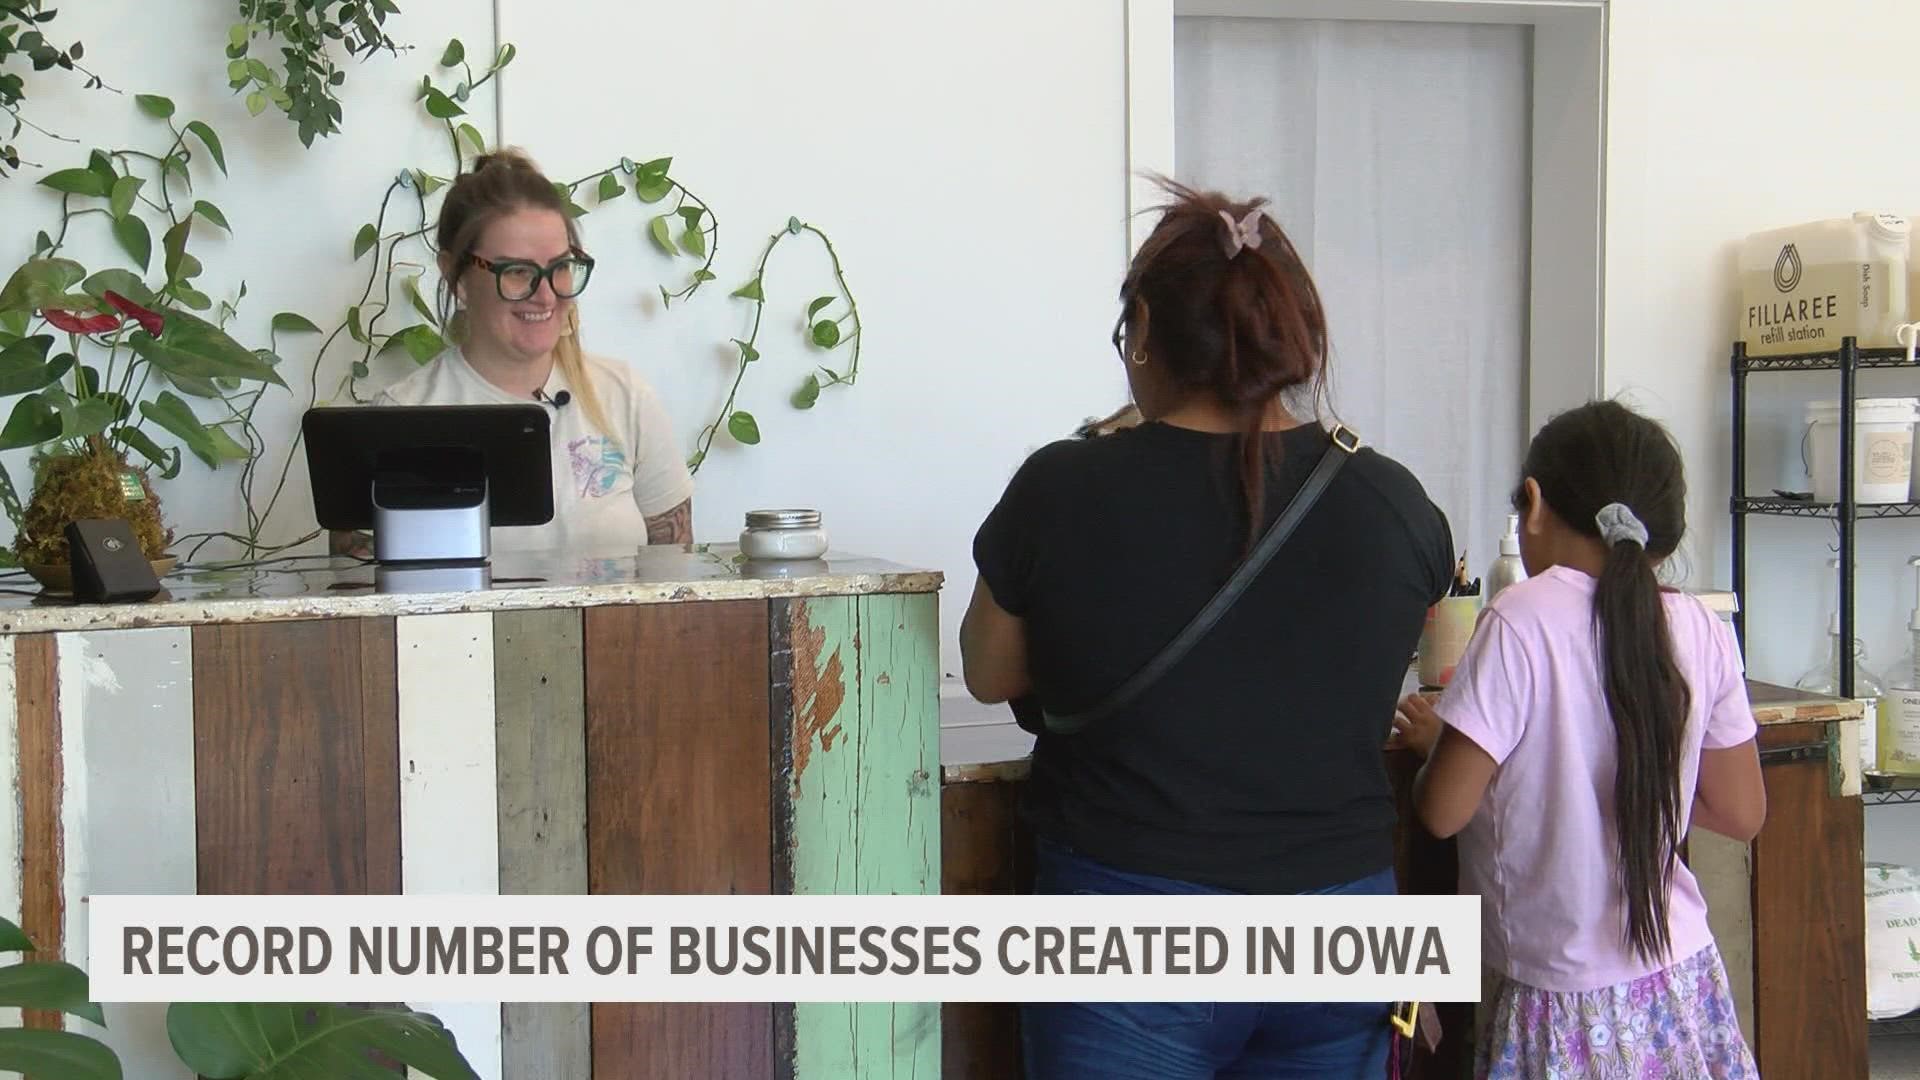 Amid low unemployment rates and government assistance, Iowa records a record amount of new businesses.